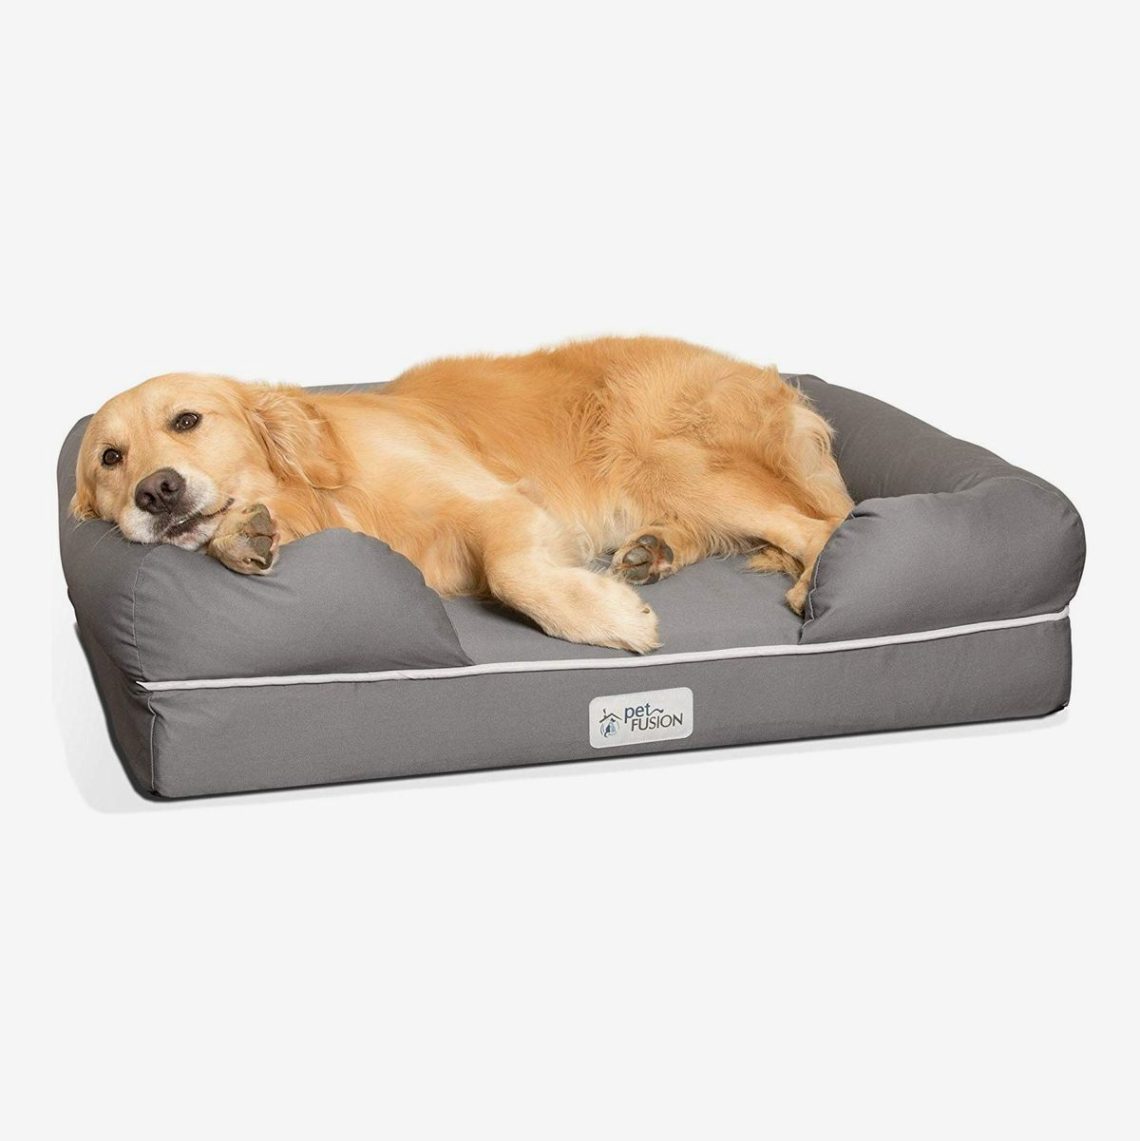 Bed for a dog: why is it?